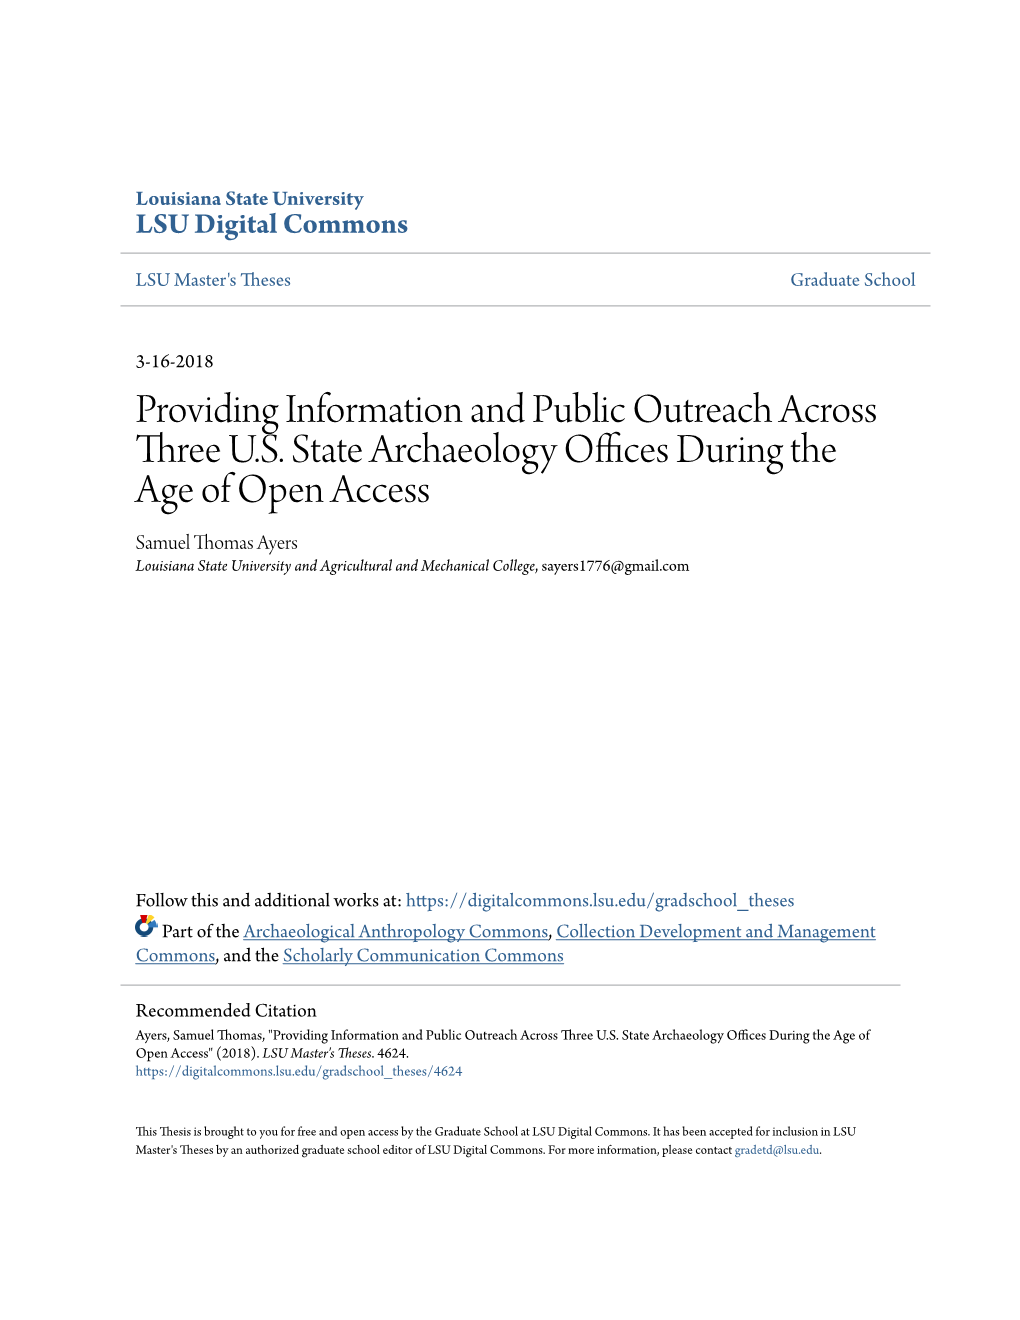 Providing Information and Public Outreach Across Three U.S. State Archaeology Offices During the Age of Open Access